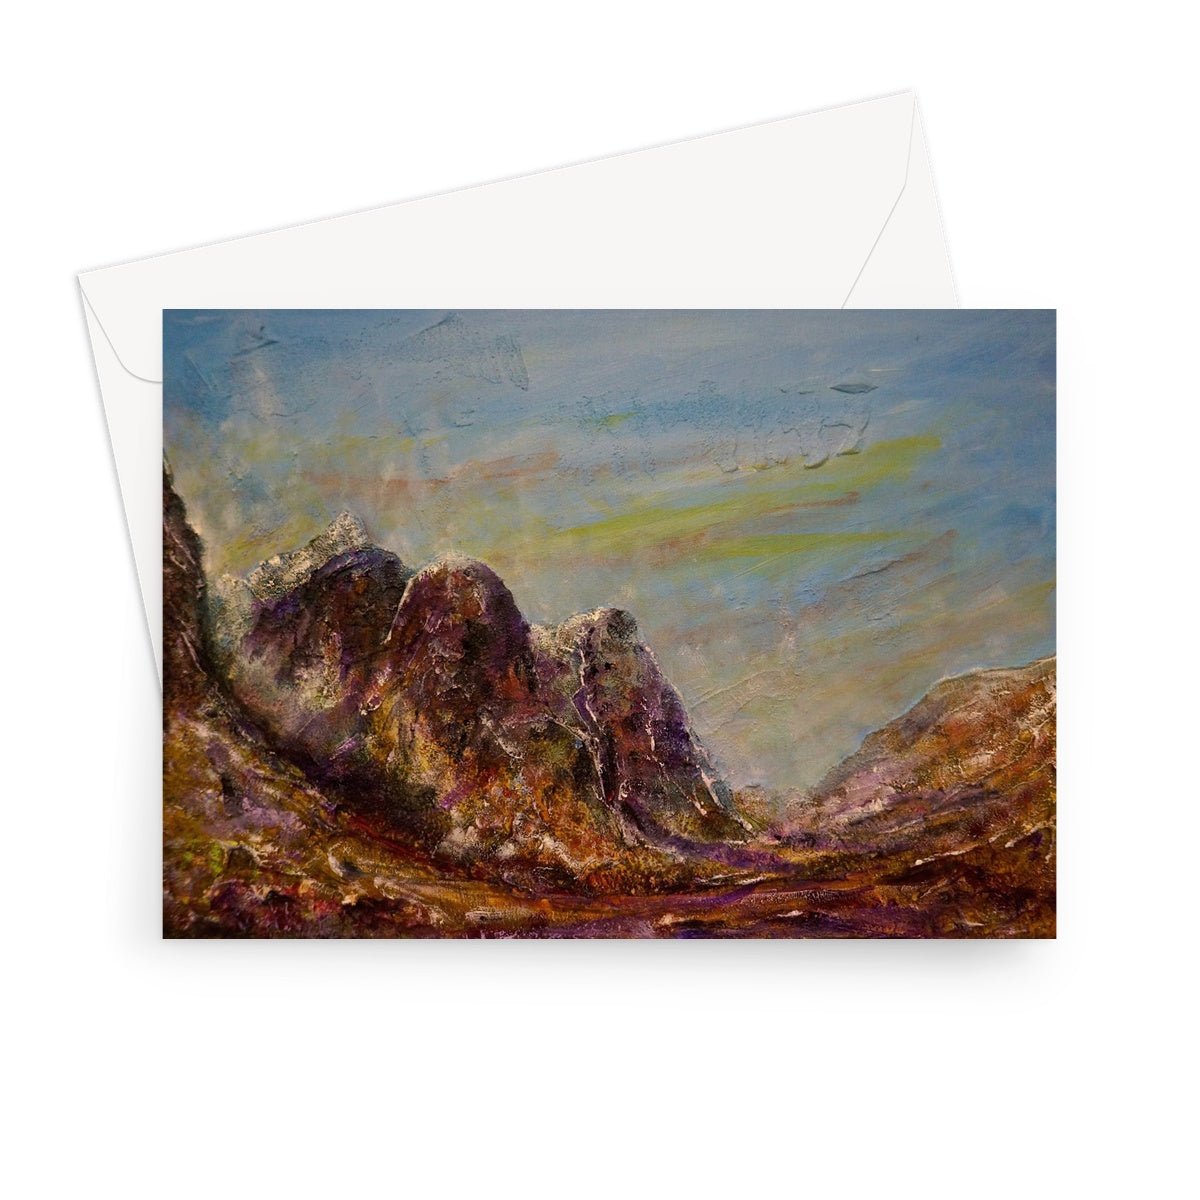 Three Sisters Glencoe Art Gifts Greeting Card-Greetings Cards-Glencoe Art Gallery-7"x5"-1 Card-Paintings, Prints, Homeware, Art Gifts From Scotland By Scottish Artist Kevin Hunter